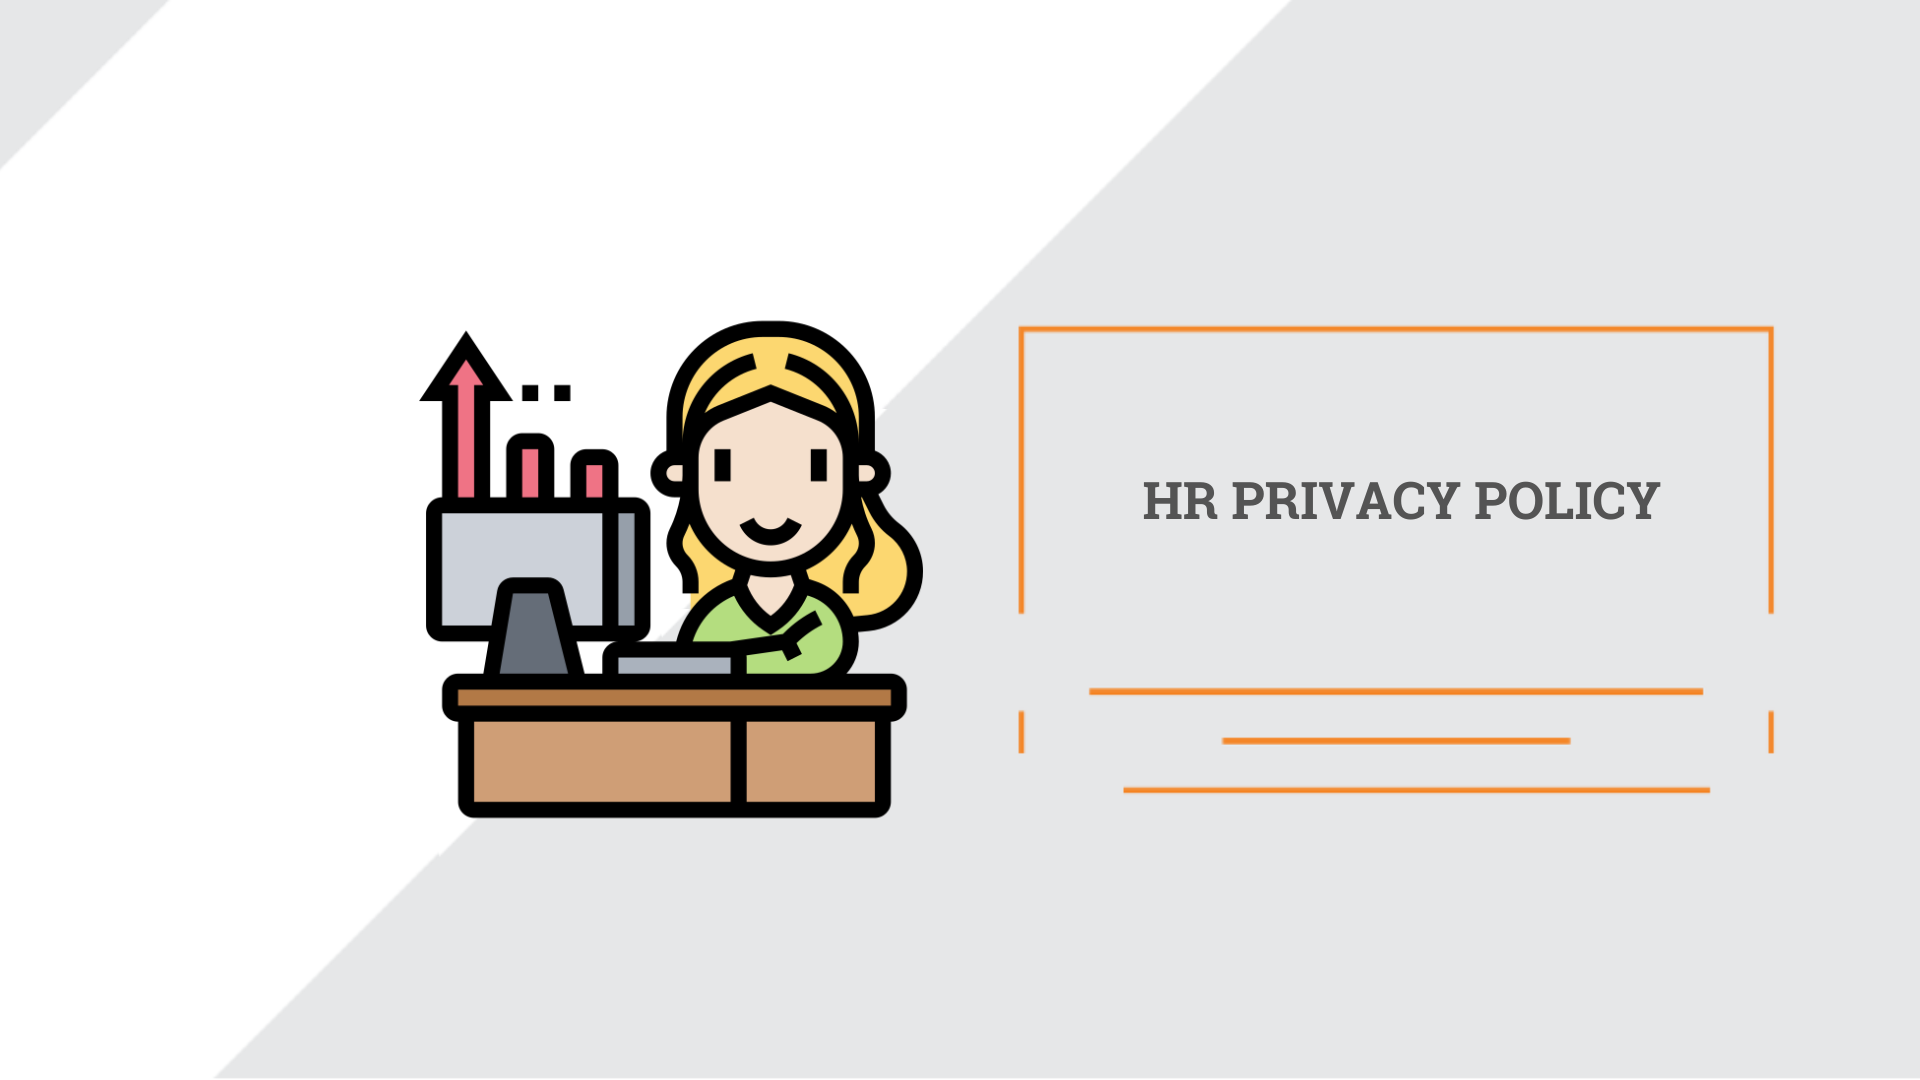 HR Privacy Policy